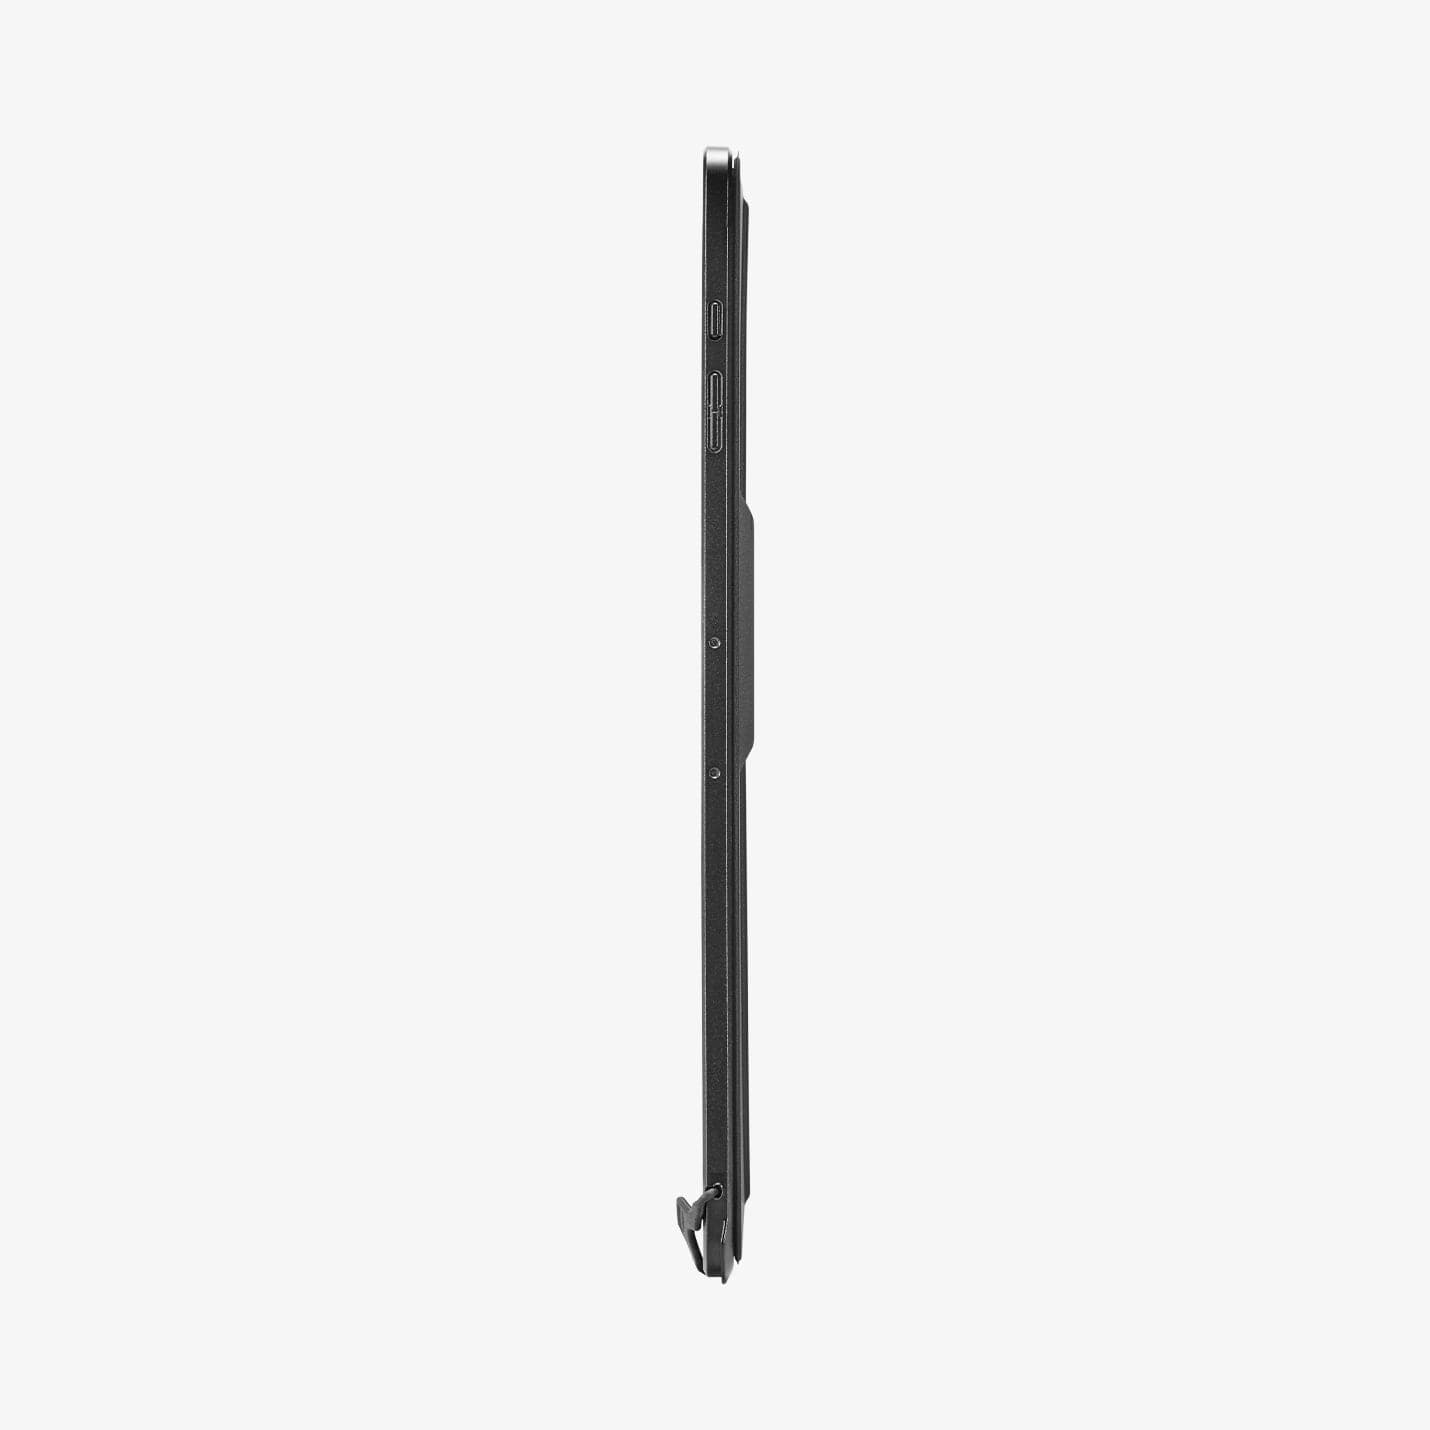 ACS06834 - Galaxy Tab S9 Ultra Case Thin Fit Pro in black showing the side with volume controls